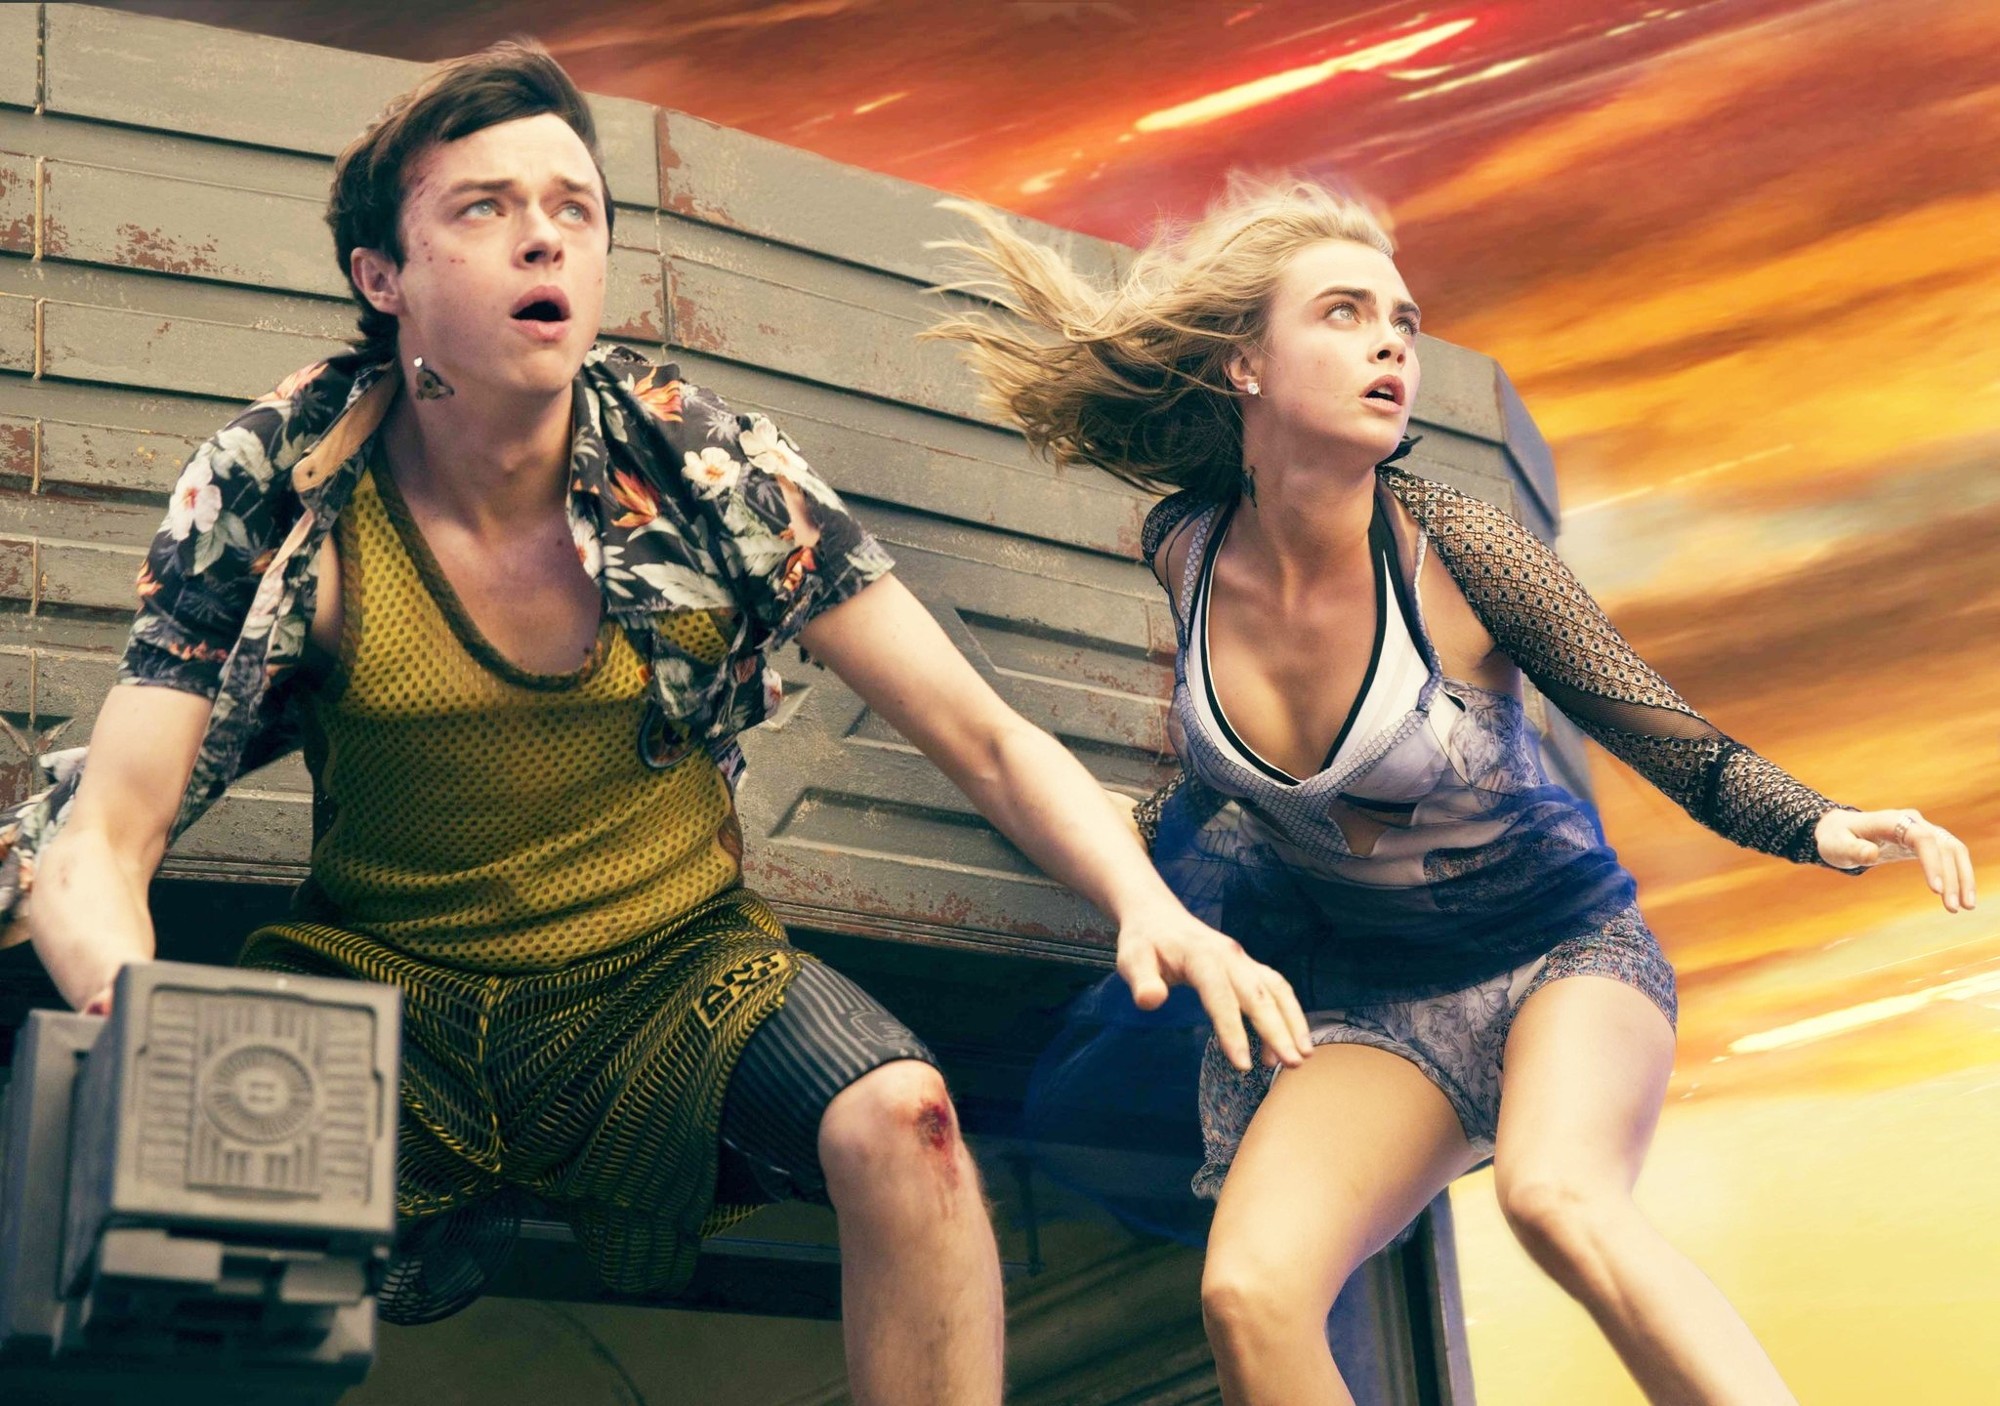 Dane DeHaan stars as Valerian and Cara Delevingne stars as Laureline in STX Entertainment's Valerian and the City of a Thousand Planets (2107)